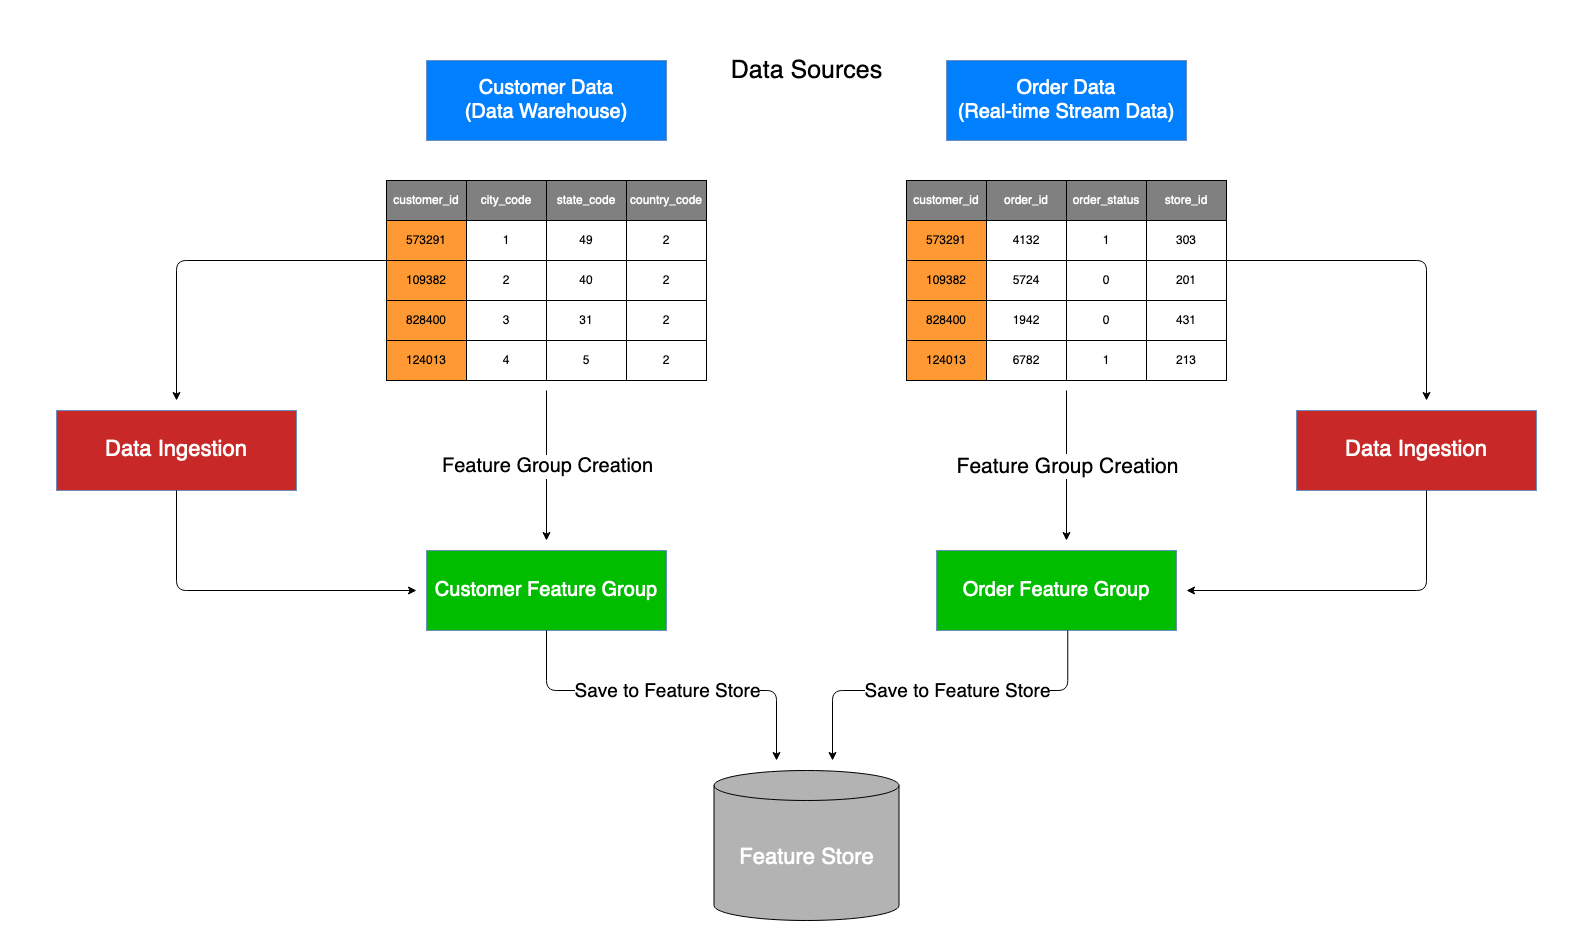 Diagram demonstrating feature group creation and data ingestion in Feature Store for this example notebook. For this example notebook two feature groups are created before ingesting data from two separate data sources. The Customer Feature Group ingests Customer Data (Data Warehouse), while the Order Feature Group ingests Order Data (Real-time Stream Data).